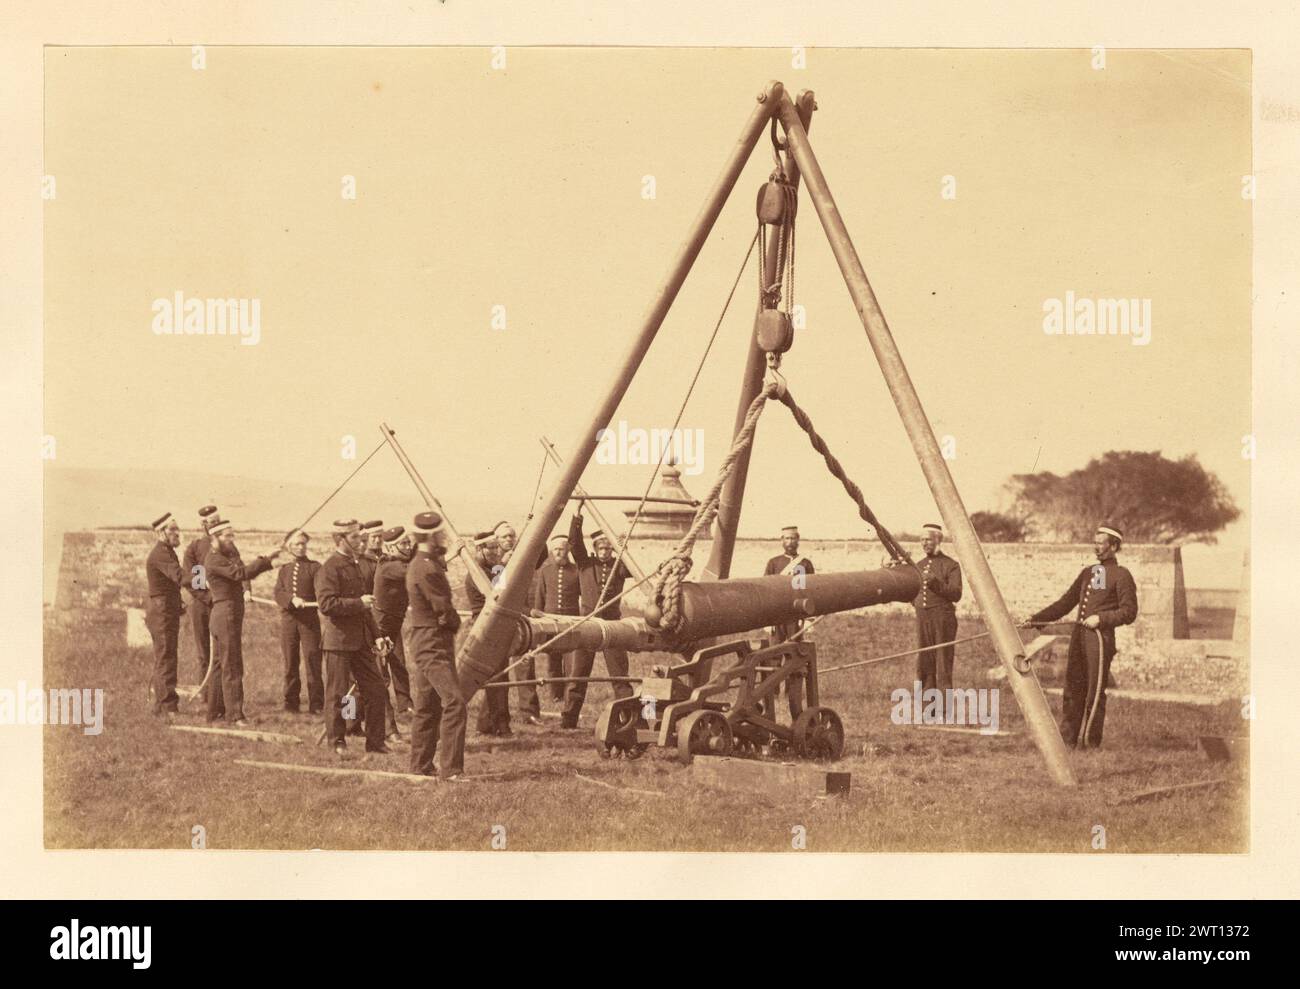 Fifeshire Artillery Militia assembling cannon. Possibly Thomas Rodger, photographer (Scottish, 1832 - 1883) about 1860s–1870s Members of the Fifeshire Artillery Militia gathered around a large tripod which is suspending a cannon. The cannon is held by ropes and a pulley attached to the center of the tripod. (Verso, mount) upper right, pencil: '20'; Stock Photo